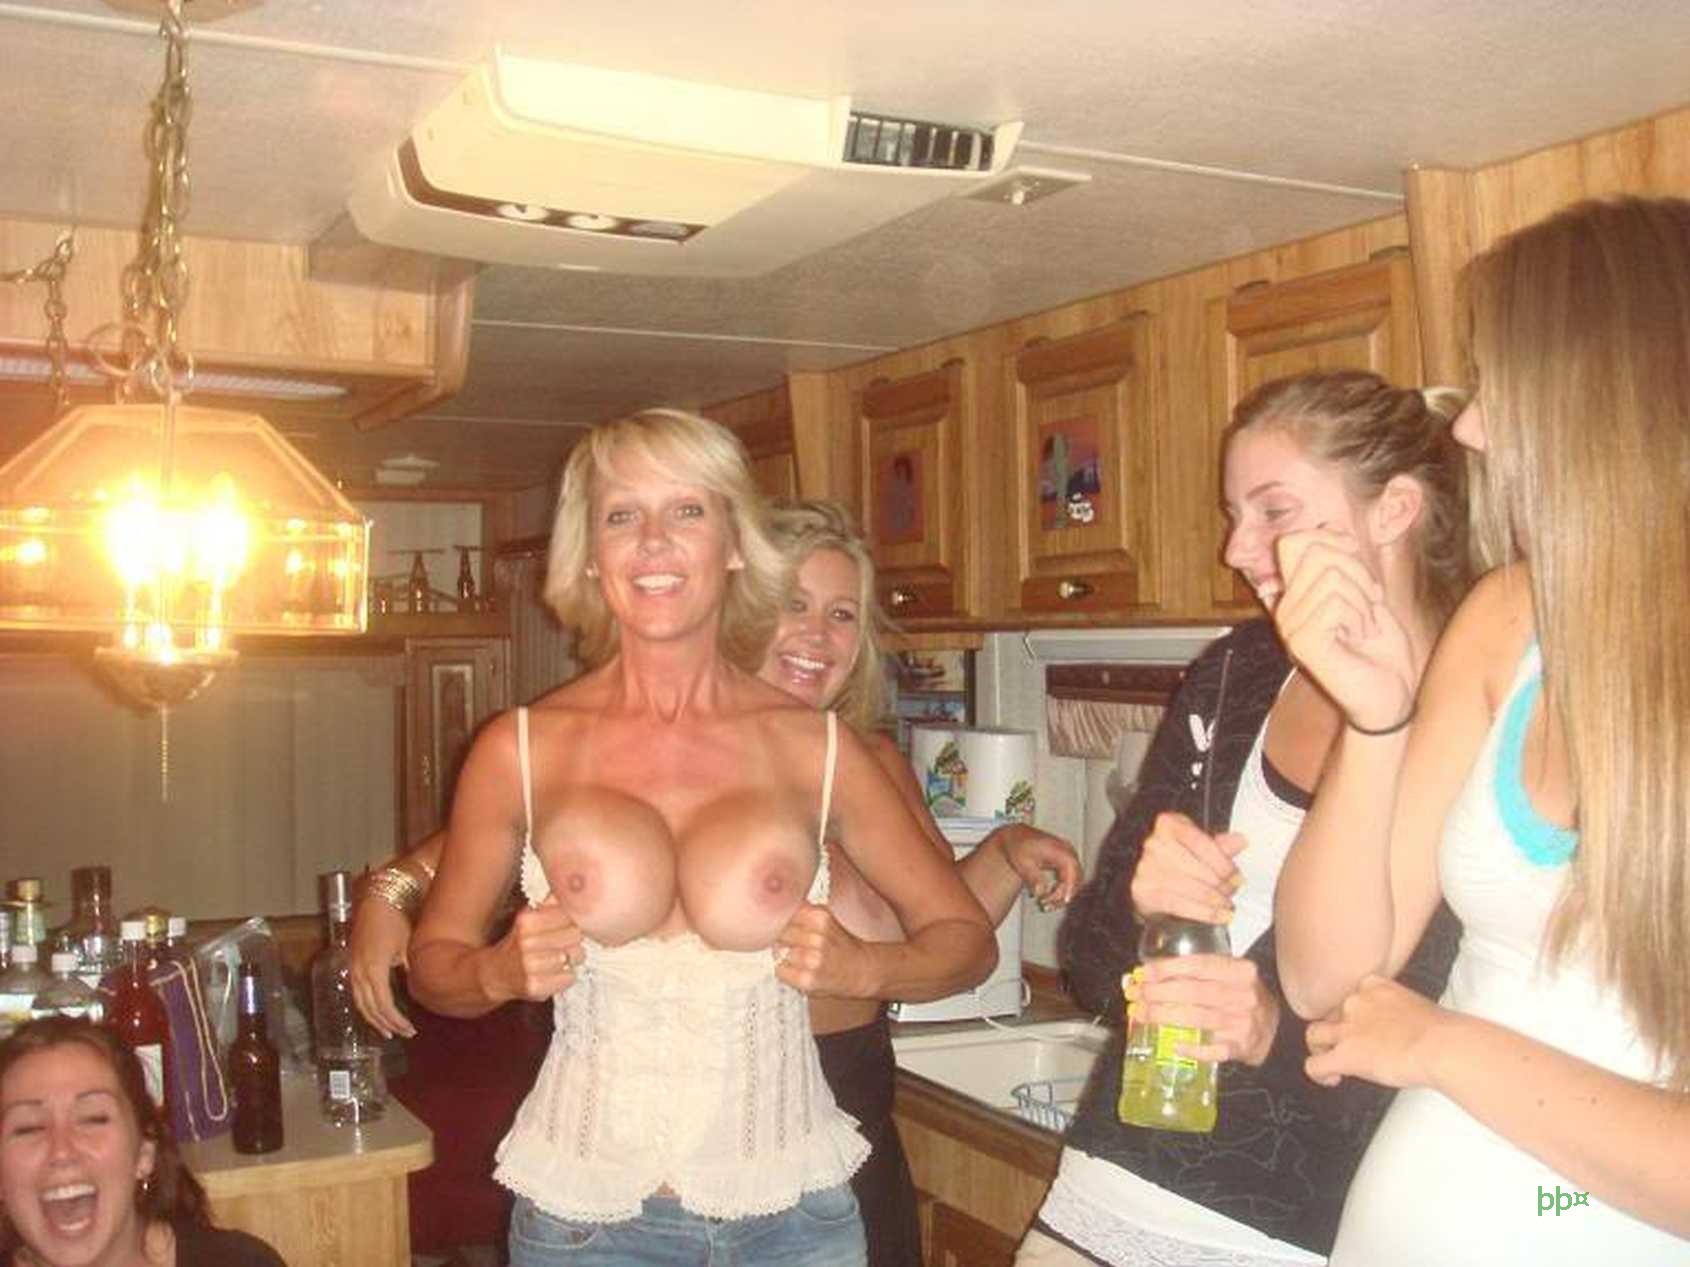 Drunk boobs out